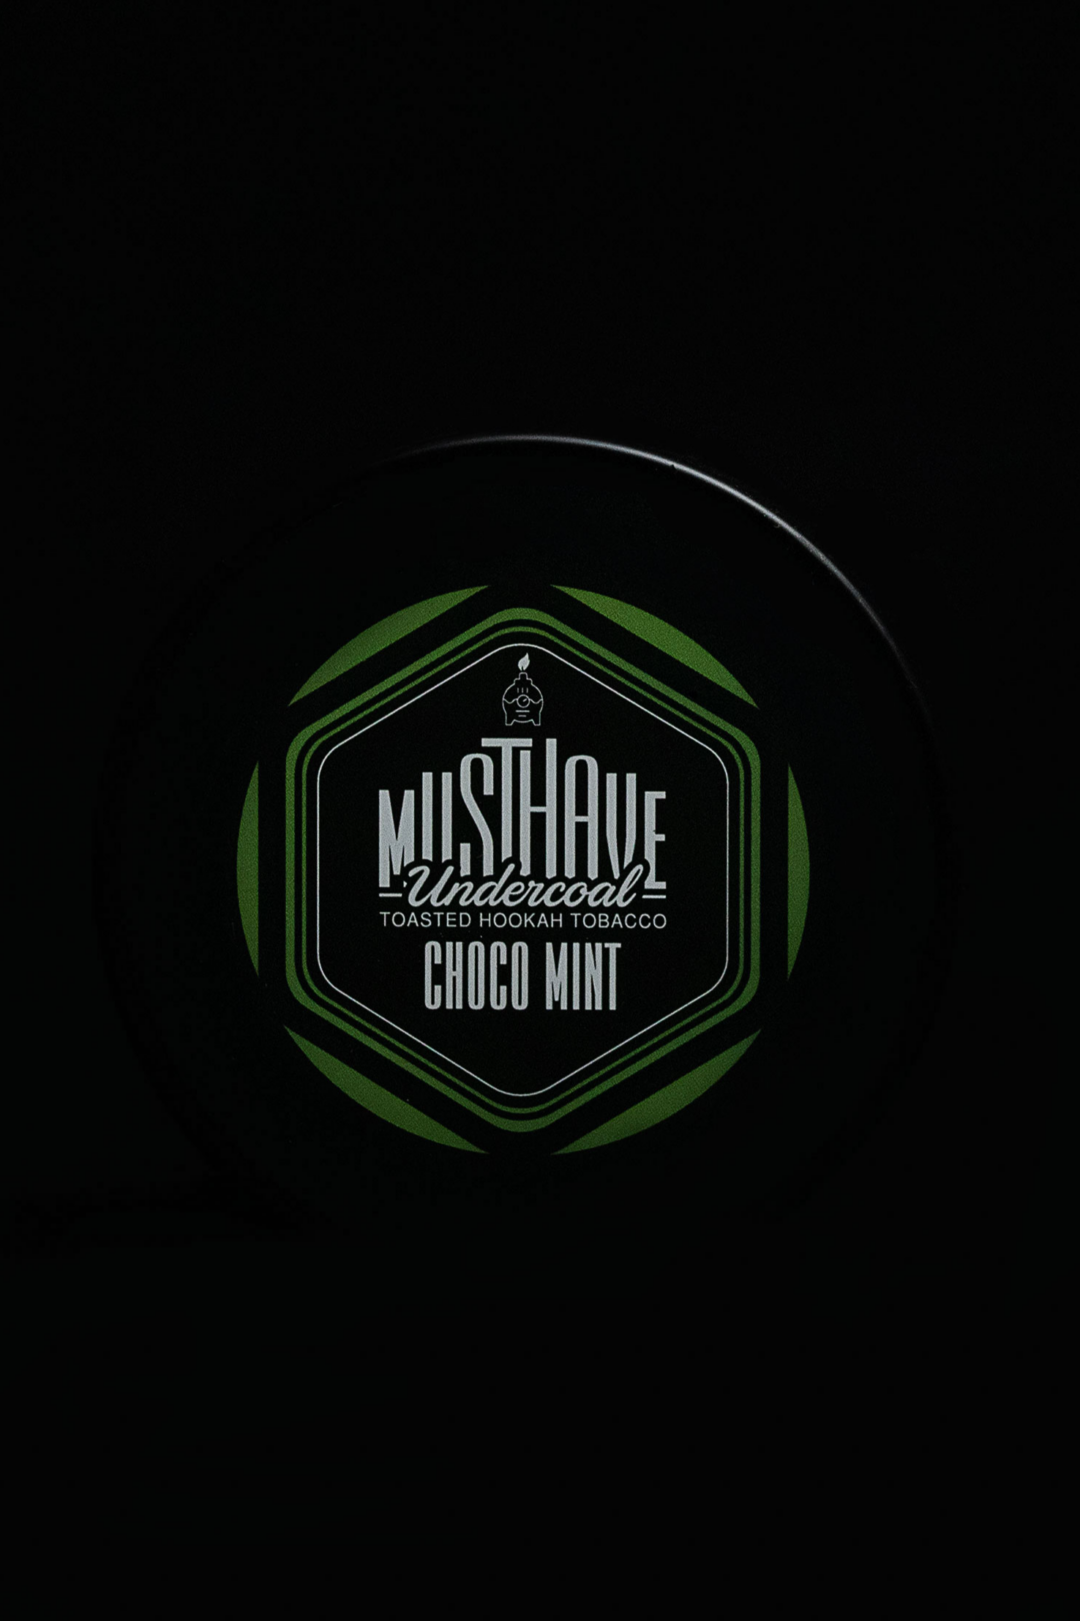 Musthave CHOCO MINT